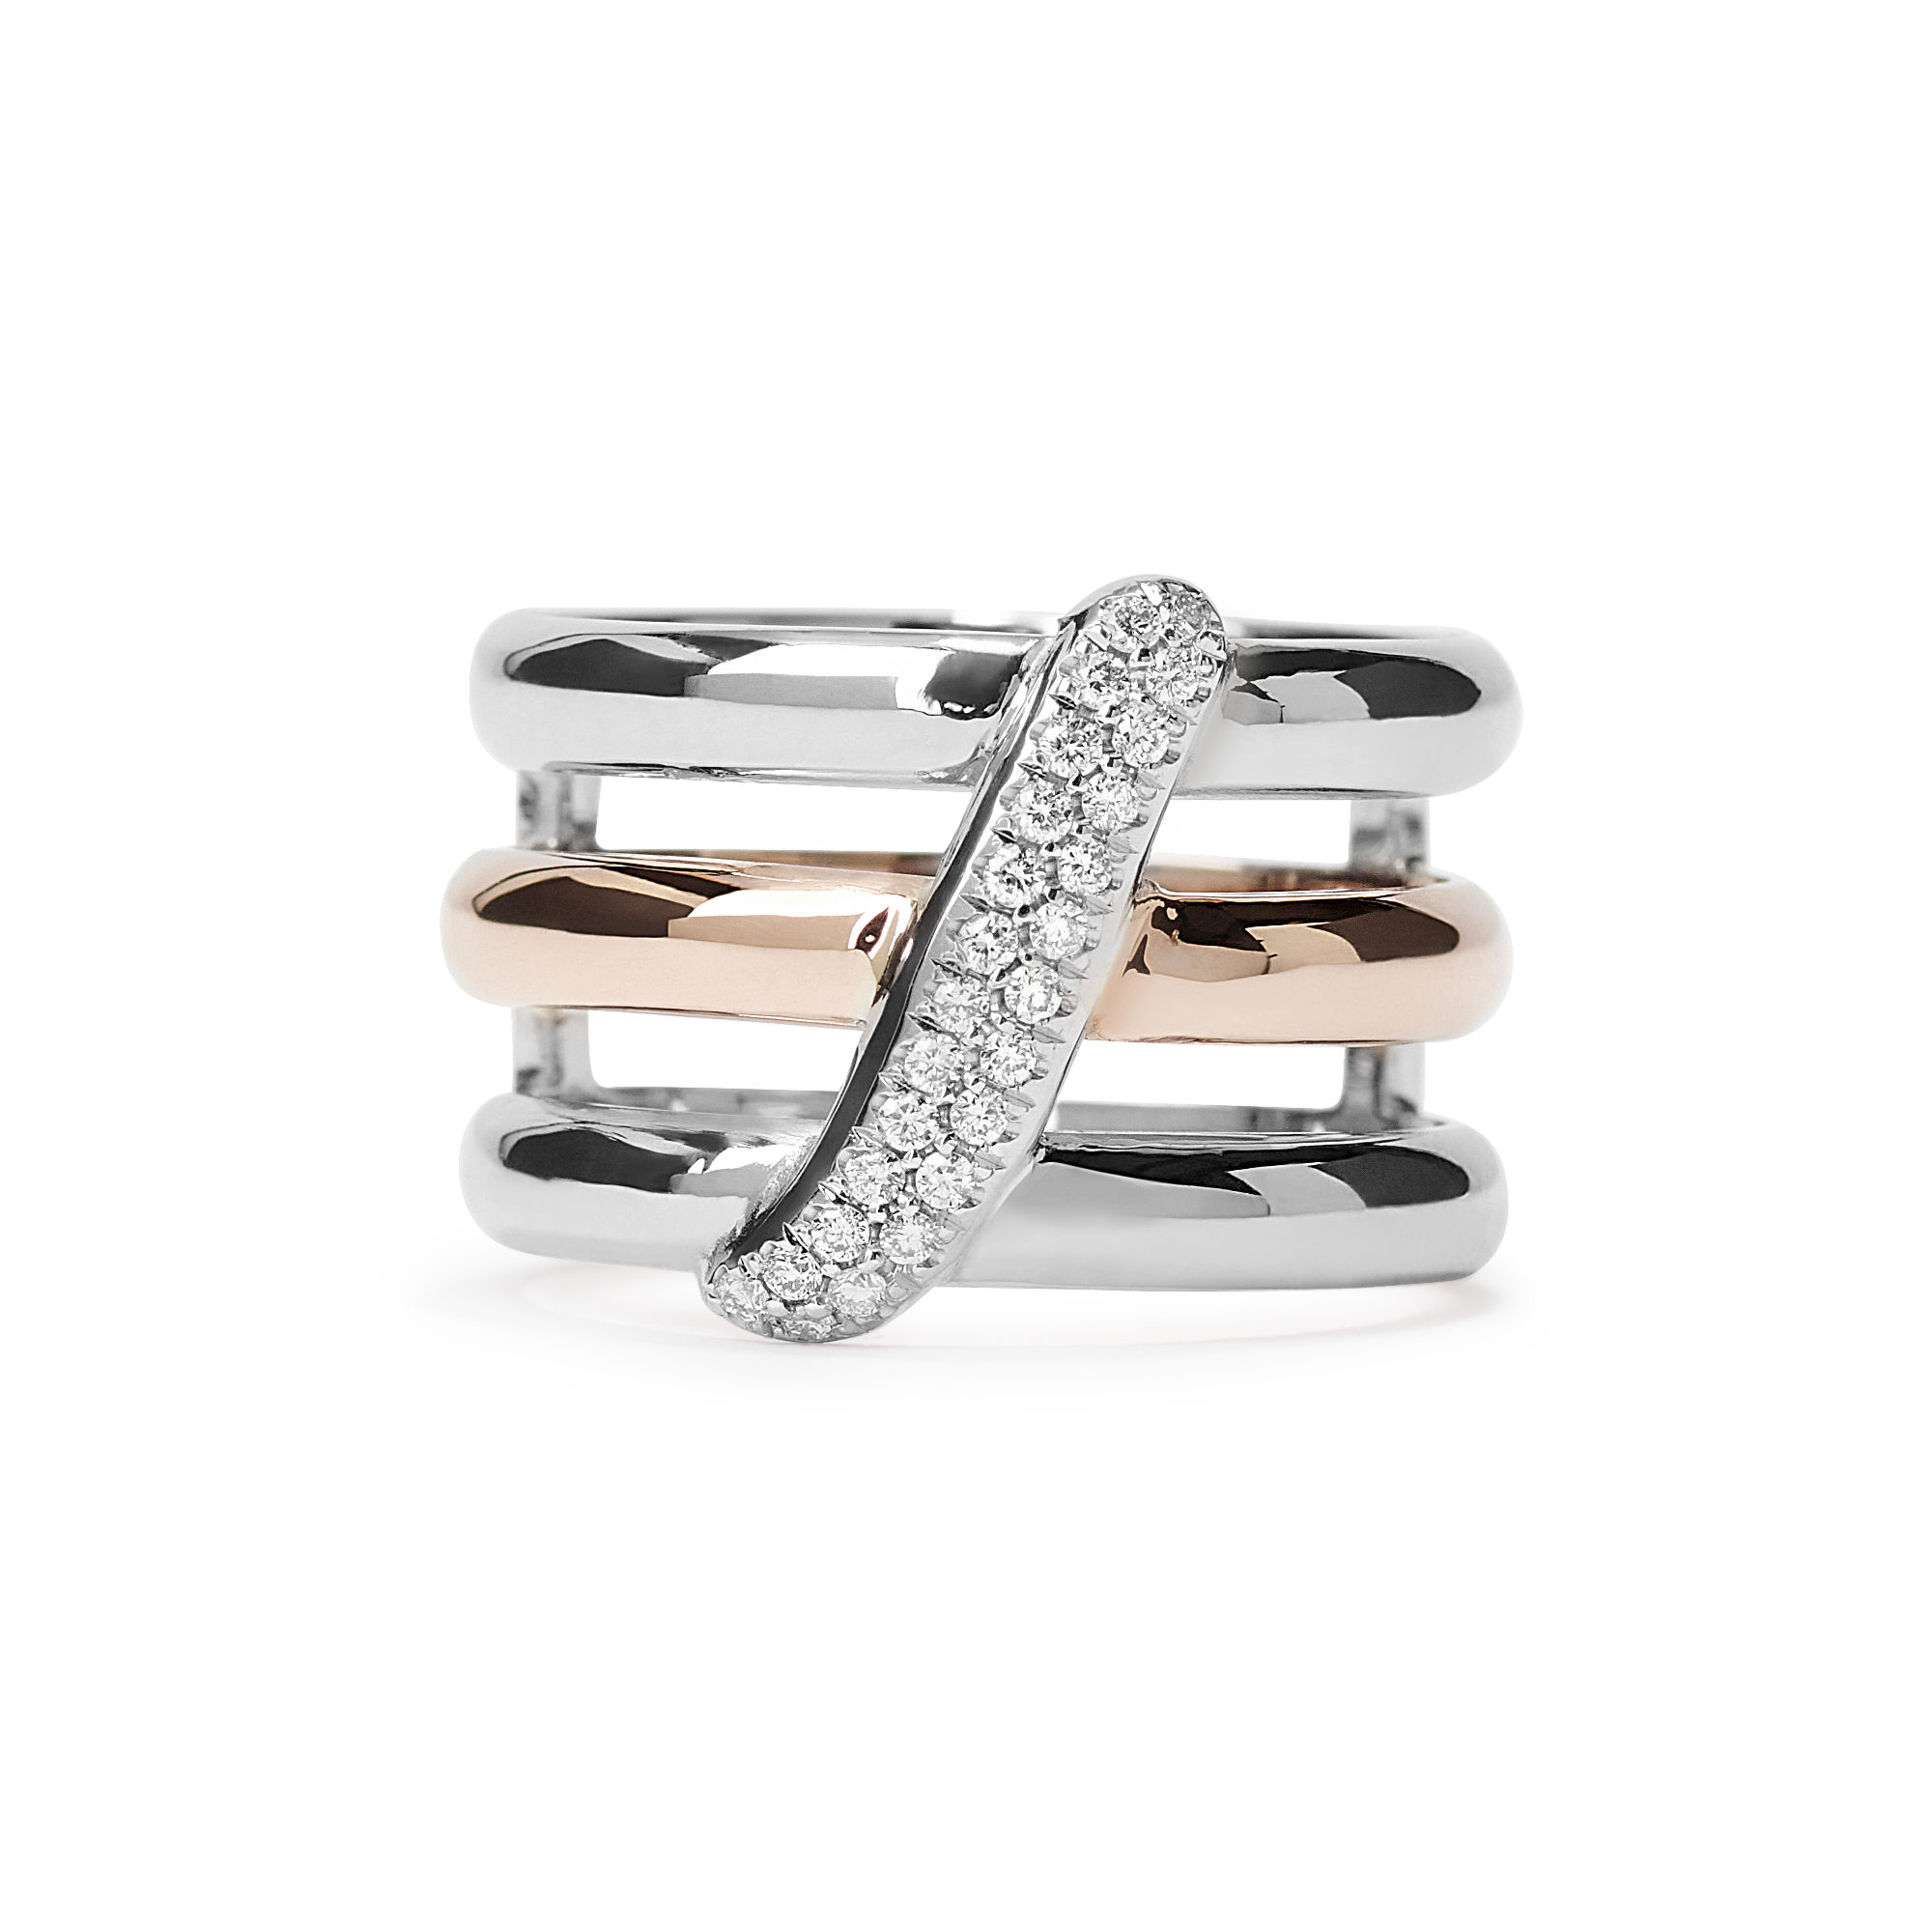 This ring features 11 grams of illustrious 18k gold that elevates a sash of 26 D color, IF/VVS clarity round brilliants. This statement ring features an 18k rose gold center band with two surrounding bands in 18k white gold.